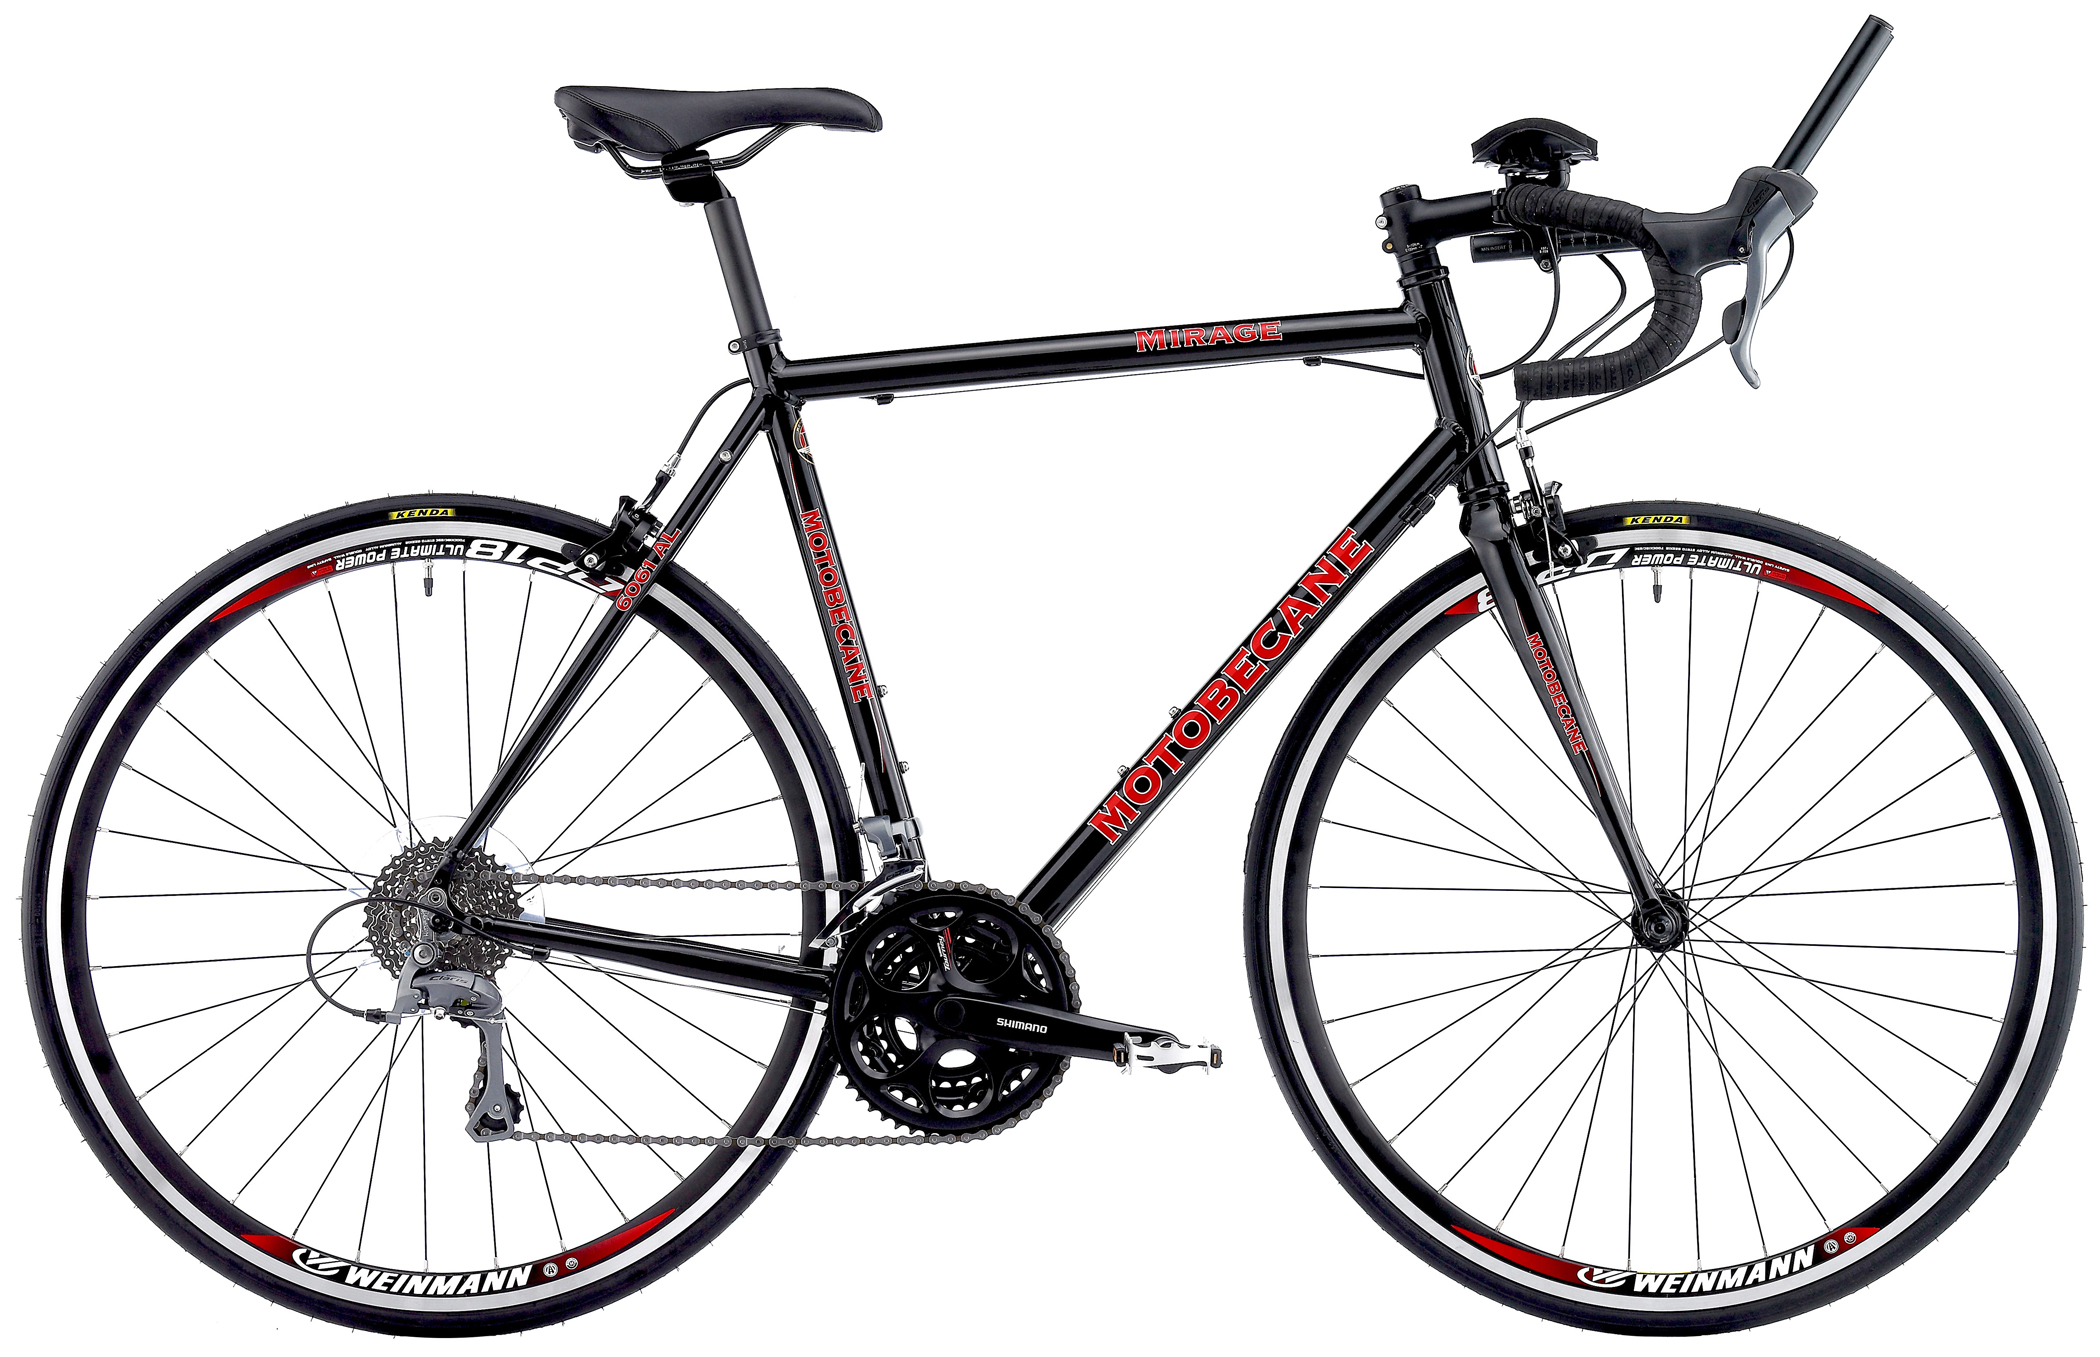 Save Up To 60% Off Road Bikes